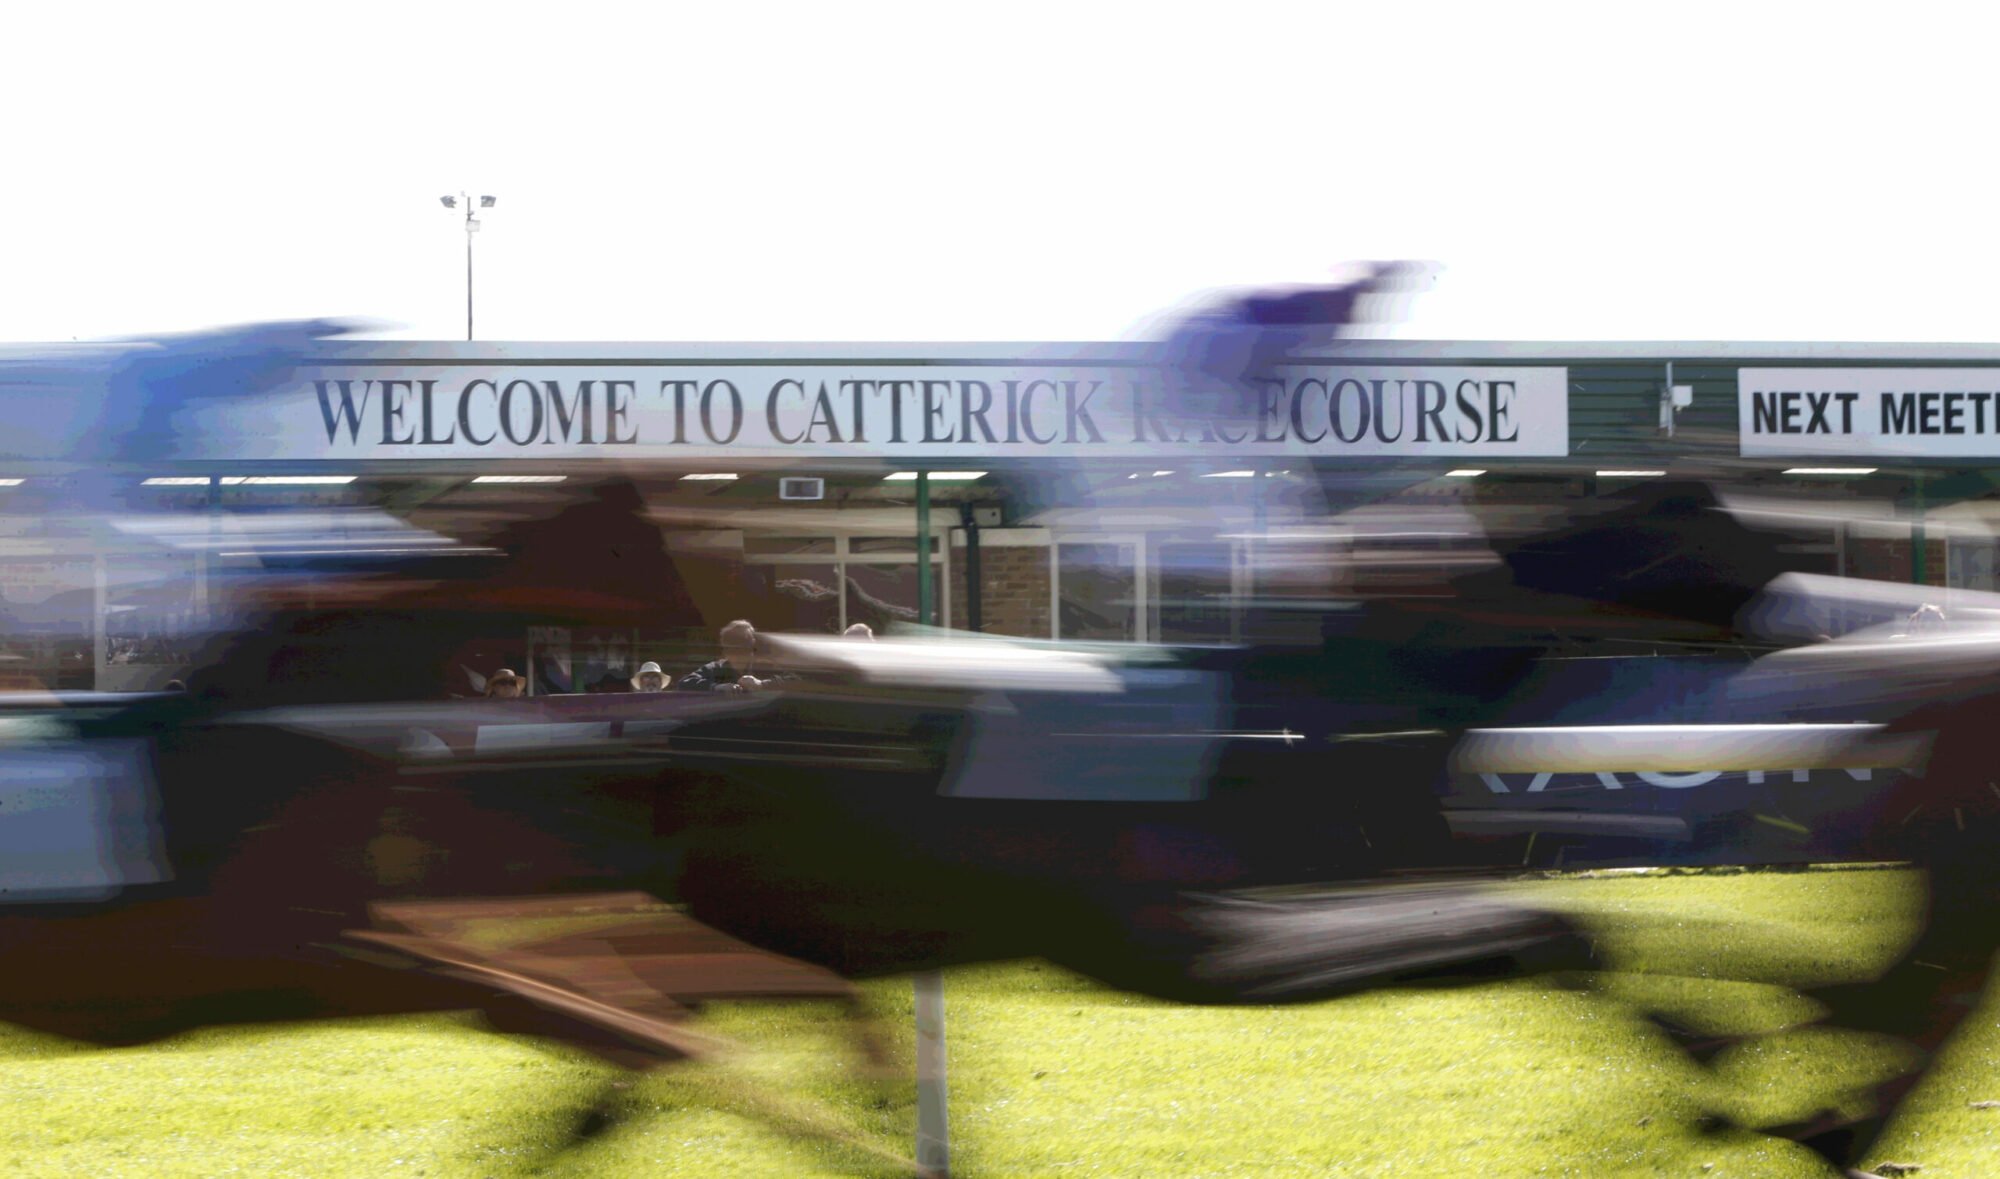 Image name Catterick Italian Riviera 001 D7X1843 scaled the 25 image from the post Catterick Jump Race at Catterick Racecourse on Tuesday, December 19, 2023 in Yorkshire.com.